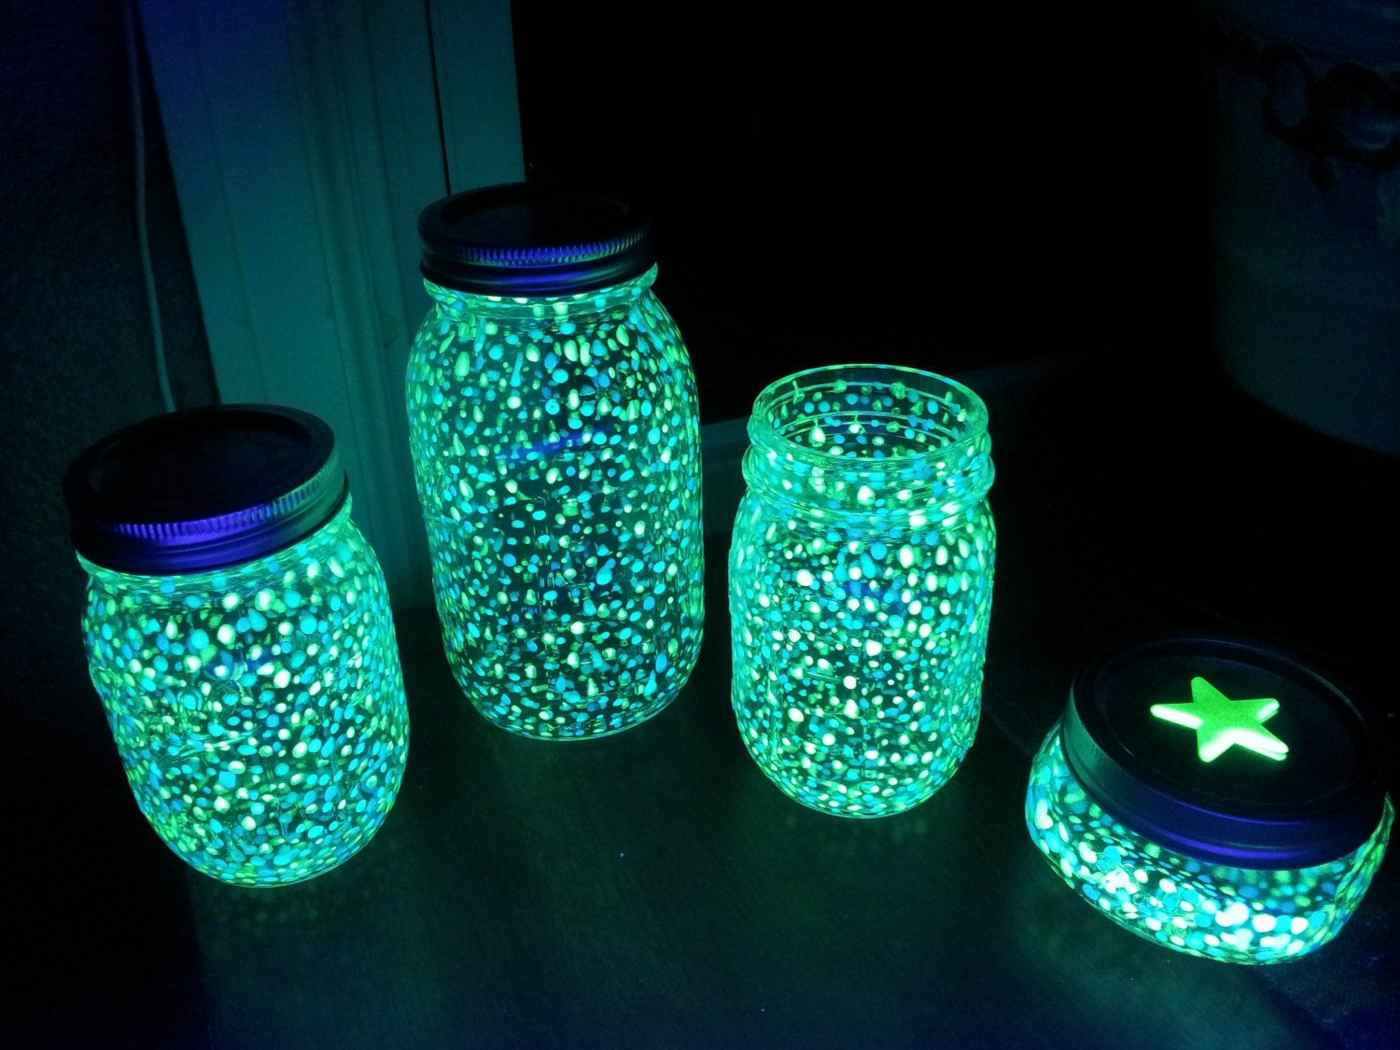 Green luminous glass with dark luminous color for dot patterns